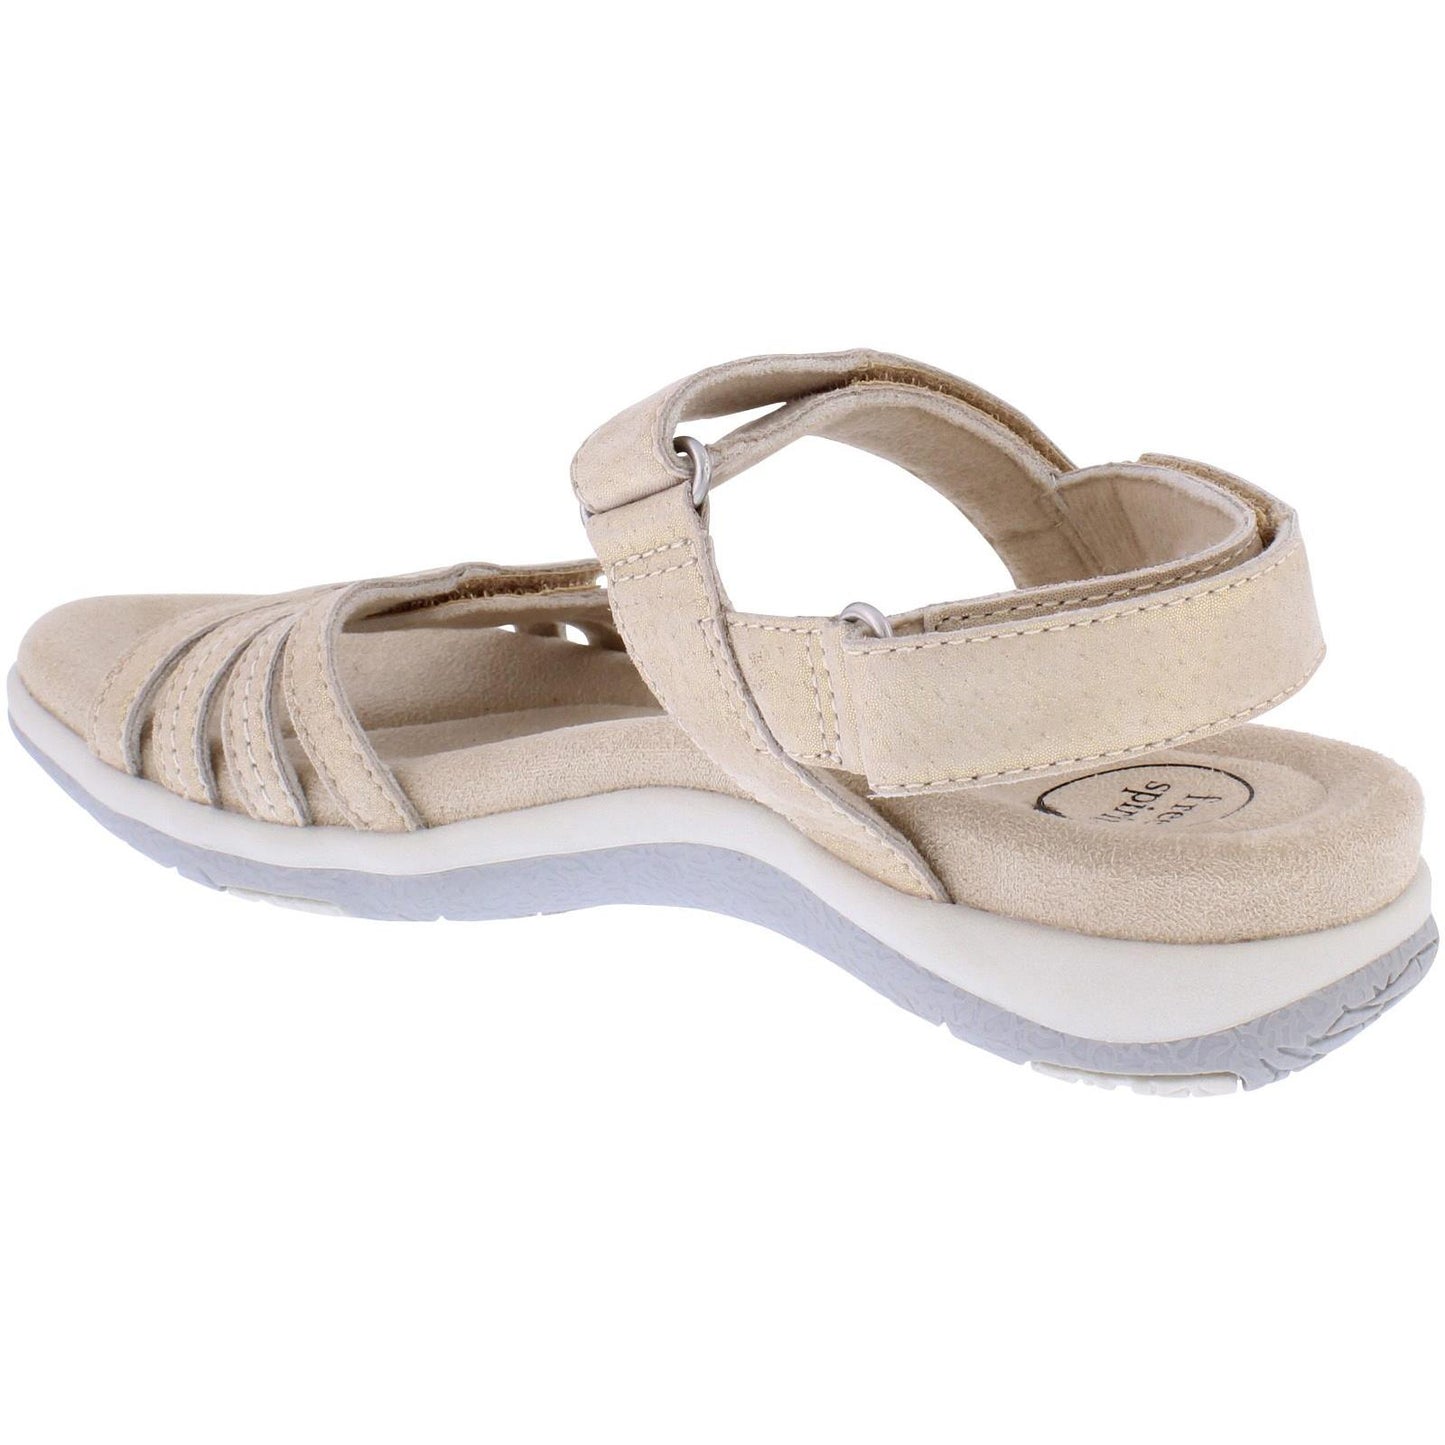 Free Spirit Womens Maddy Champagne Shimmer Leather Fully Adjustable Strap Sandals